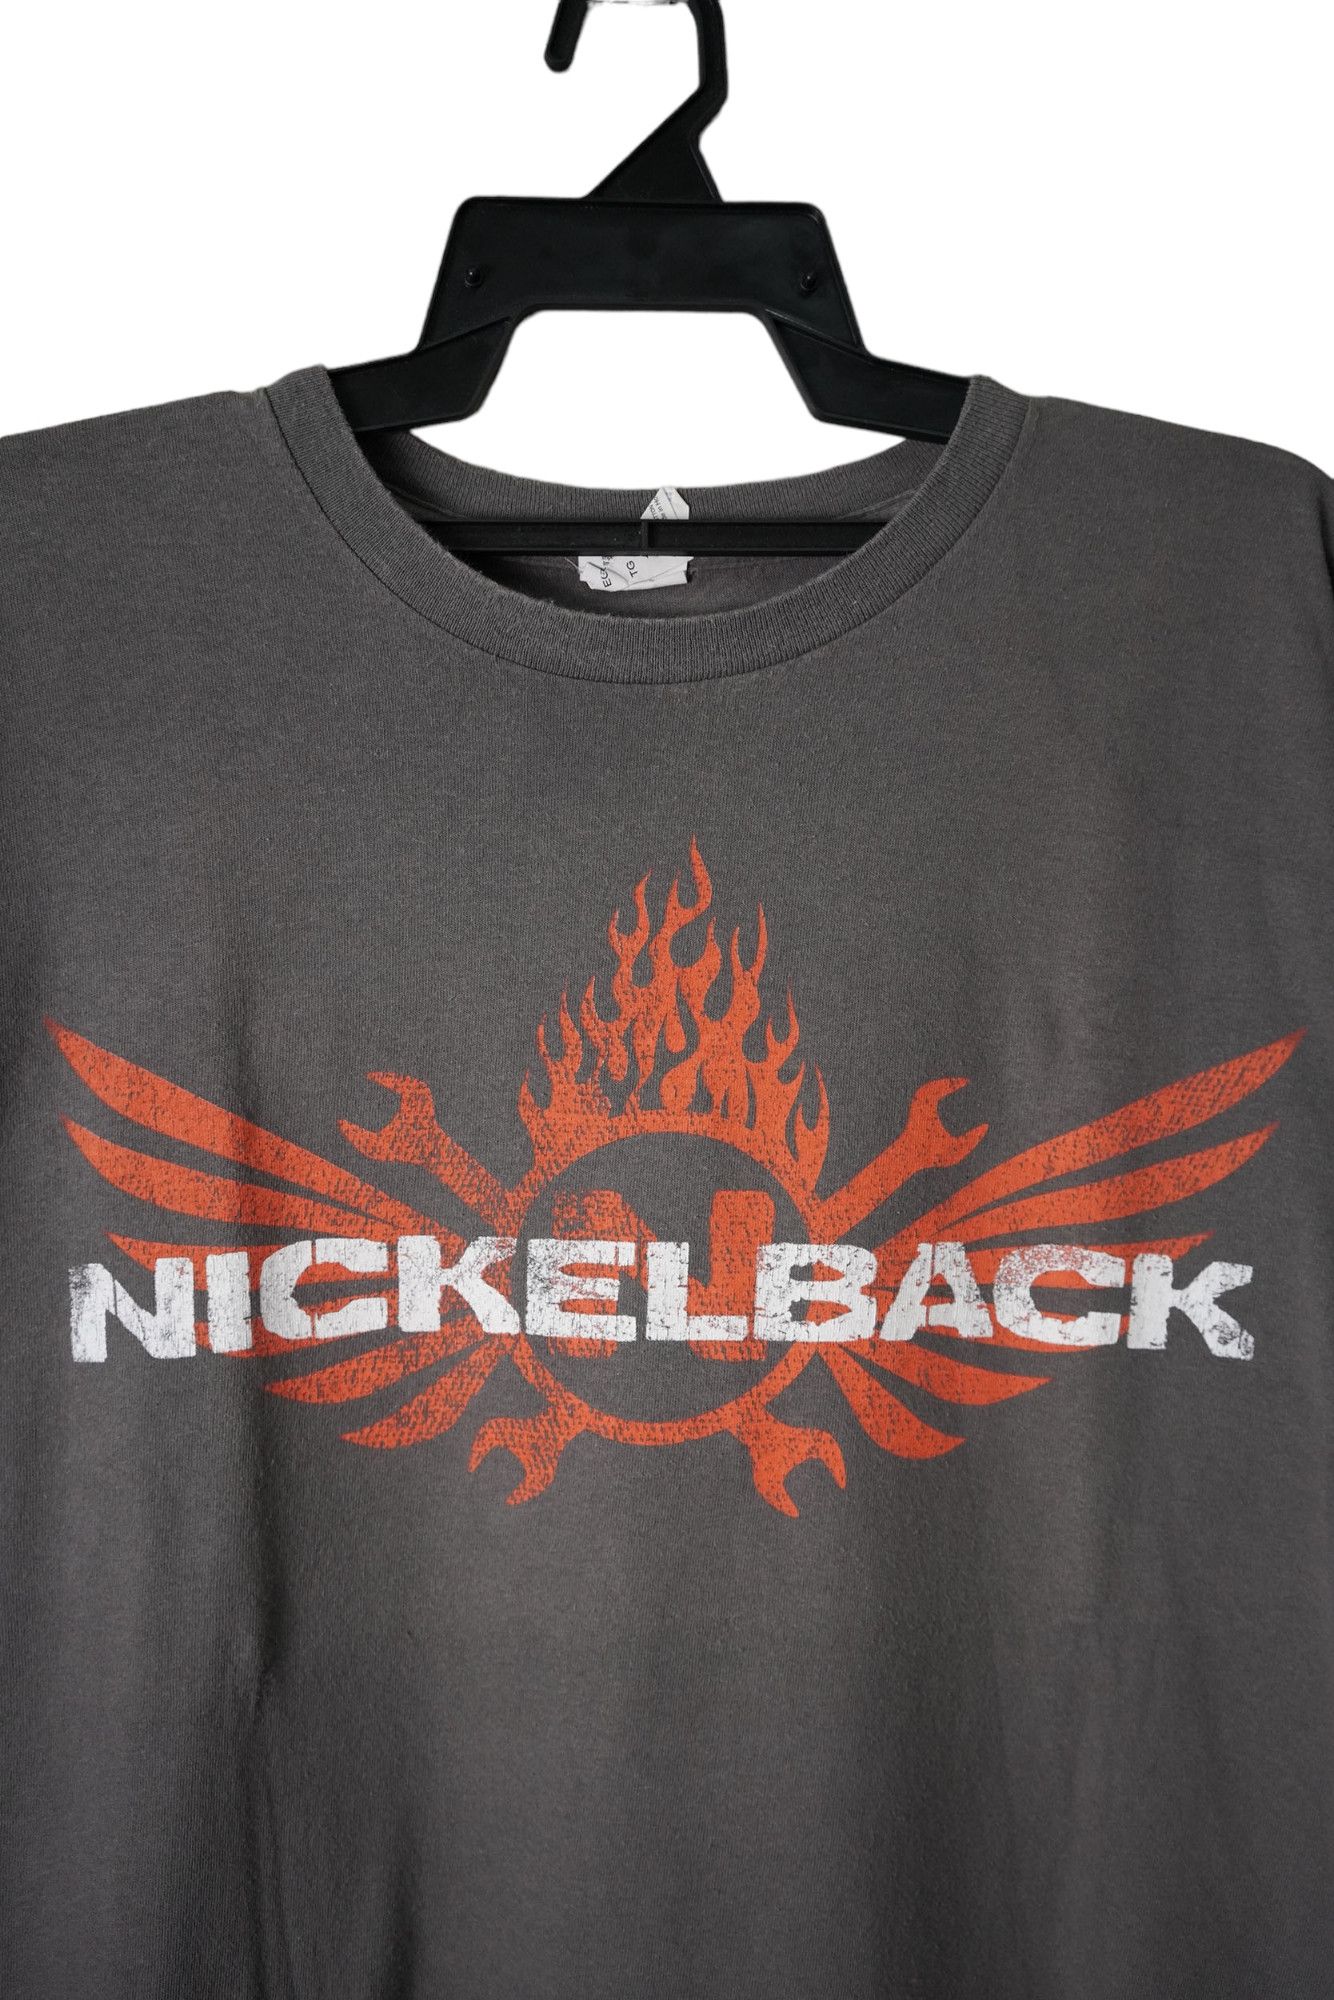 Tour Tee Nickelback Here and Now North American Tour 2012 Size US XL / EU 56 / 4 - 3 Thumbnail